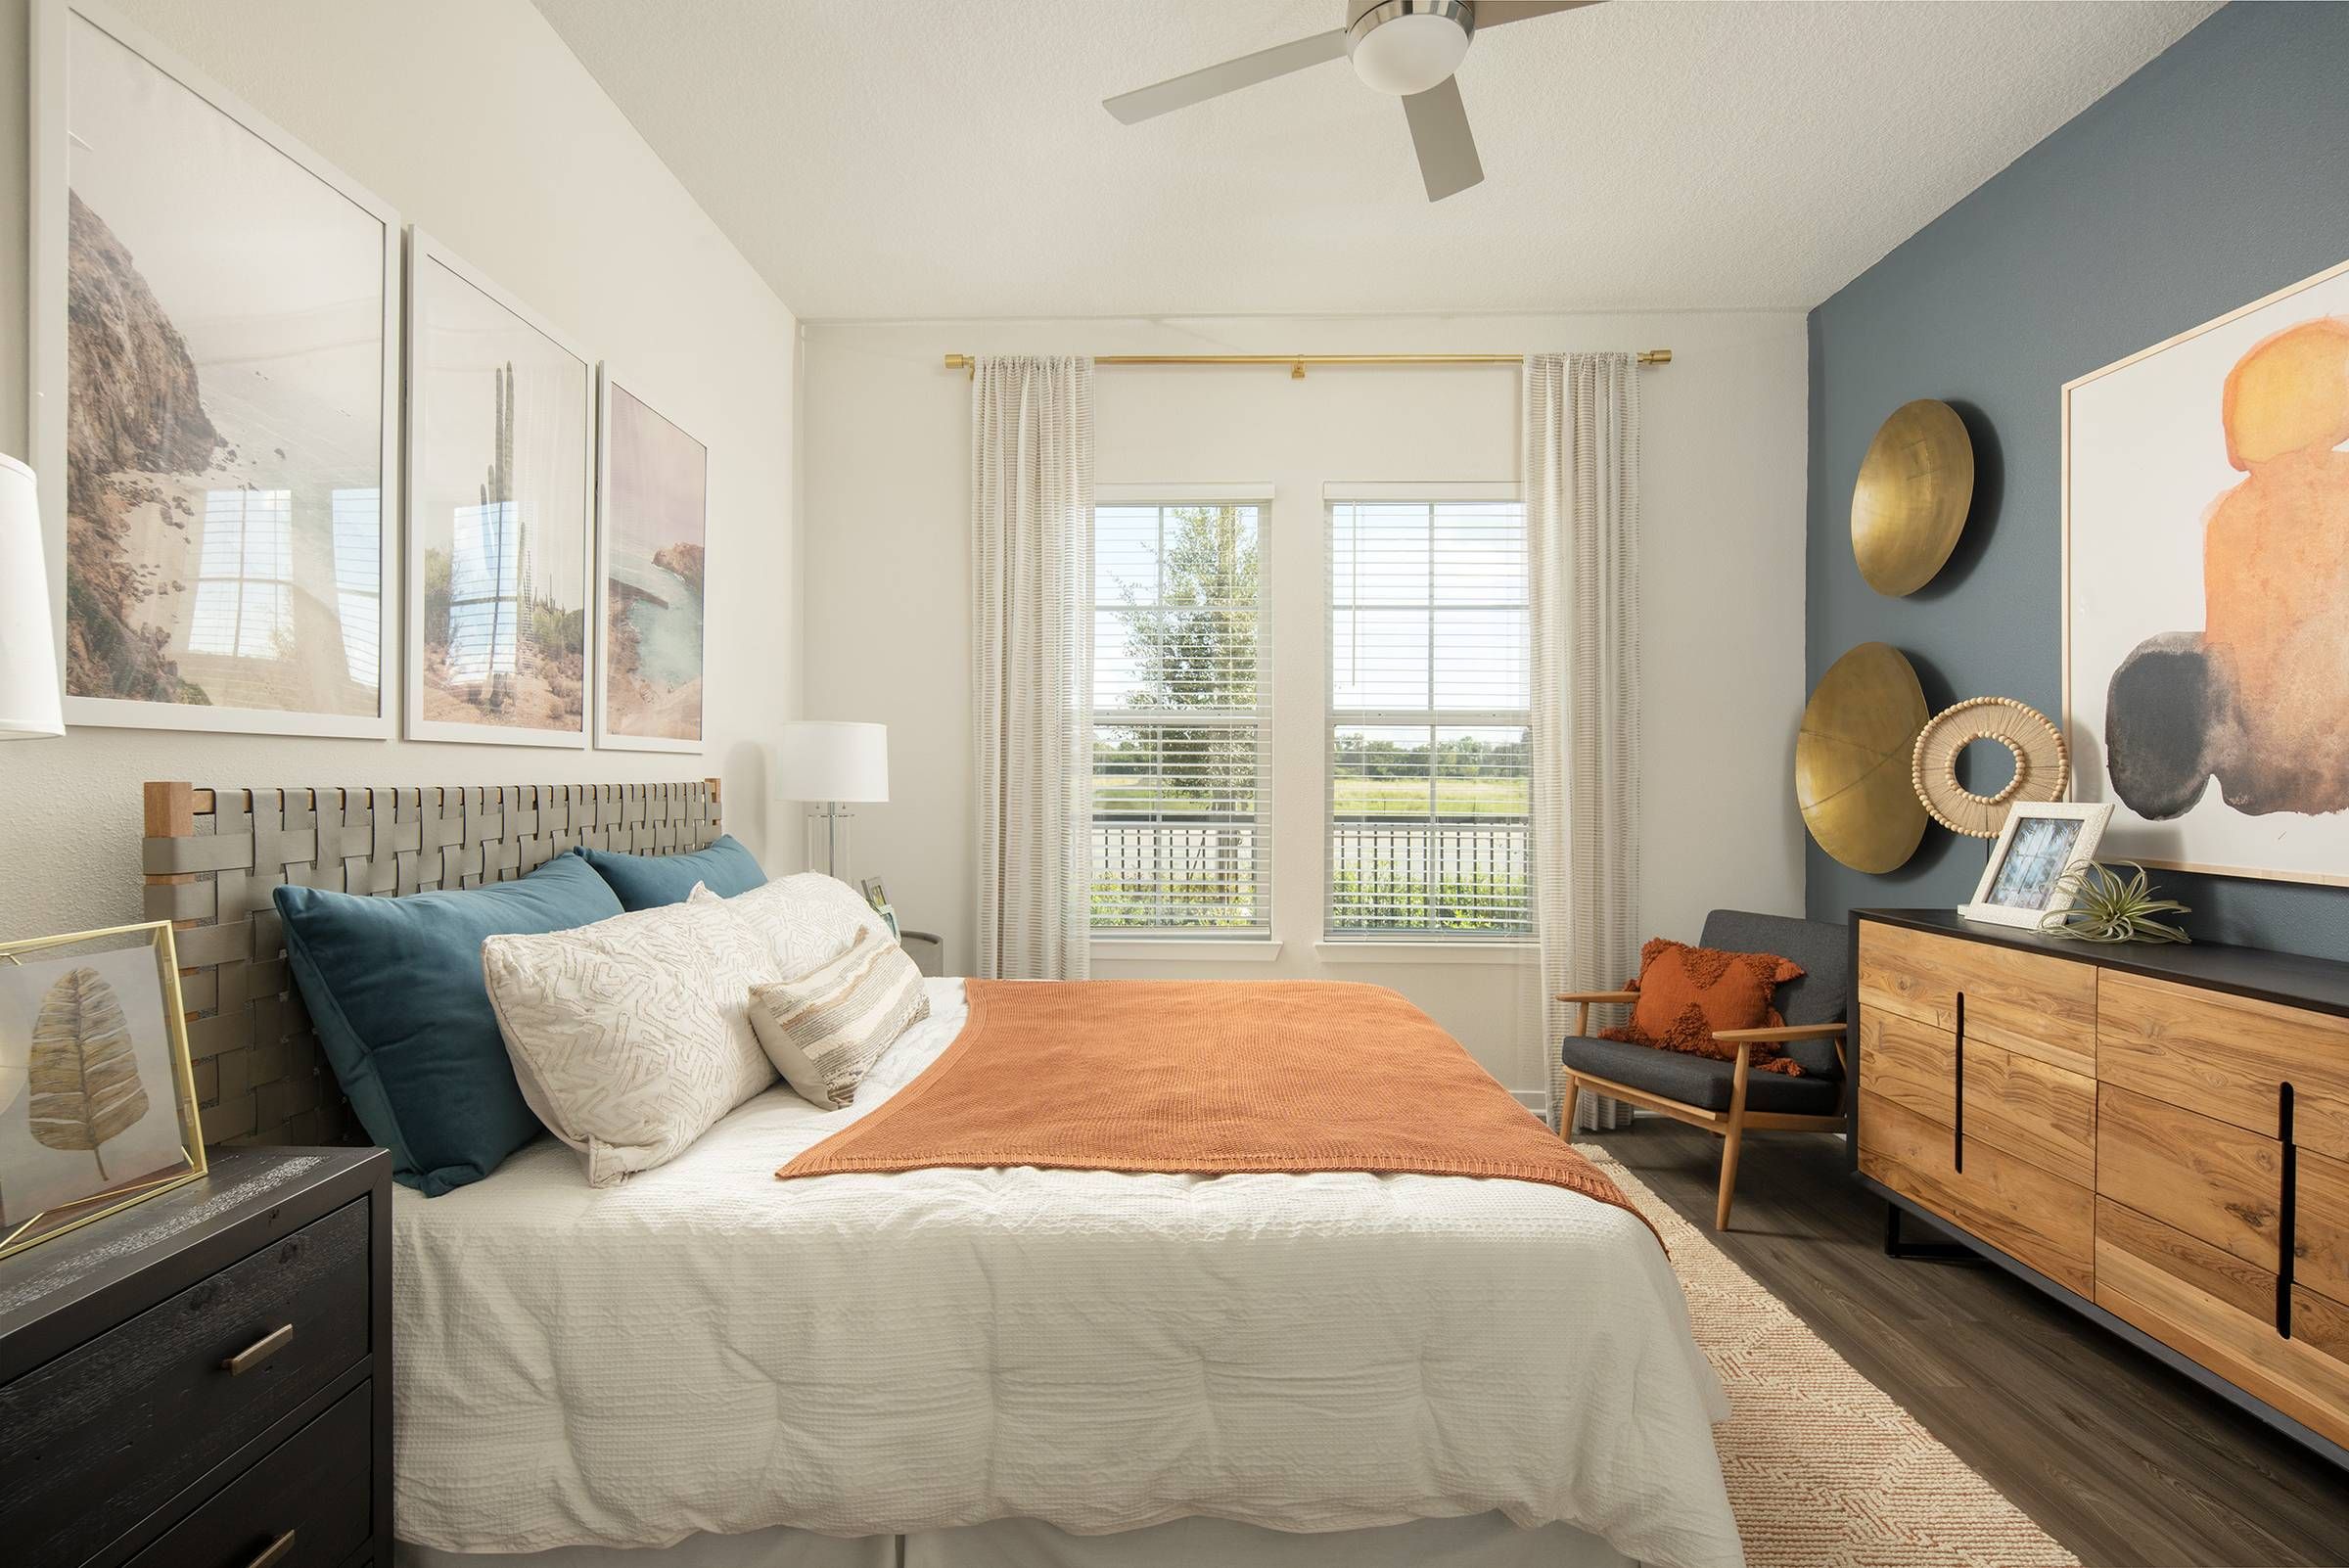 A cozy bedroom at Alta Winter Garden featuring a warm-toned bedspread, stylish wall decor, and views of the outdoors.